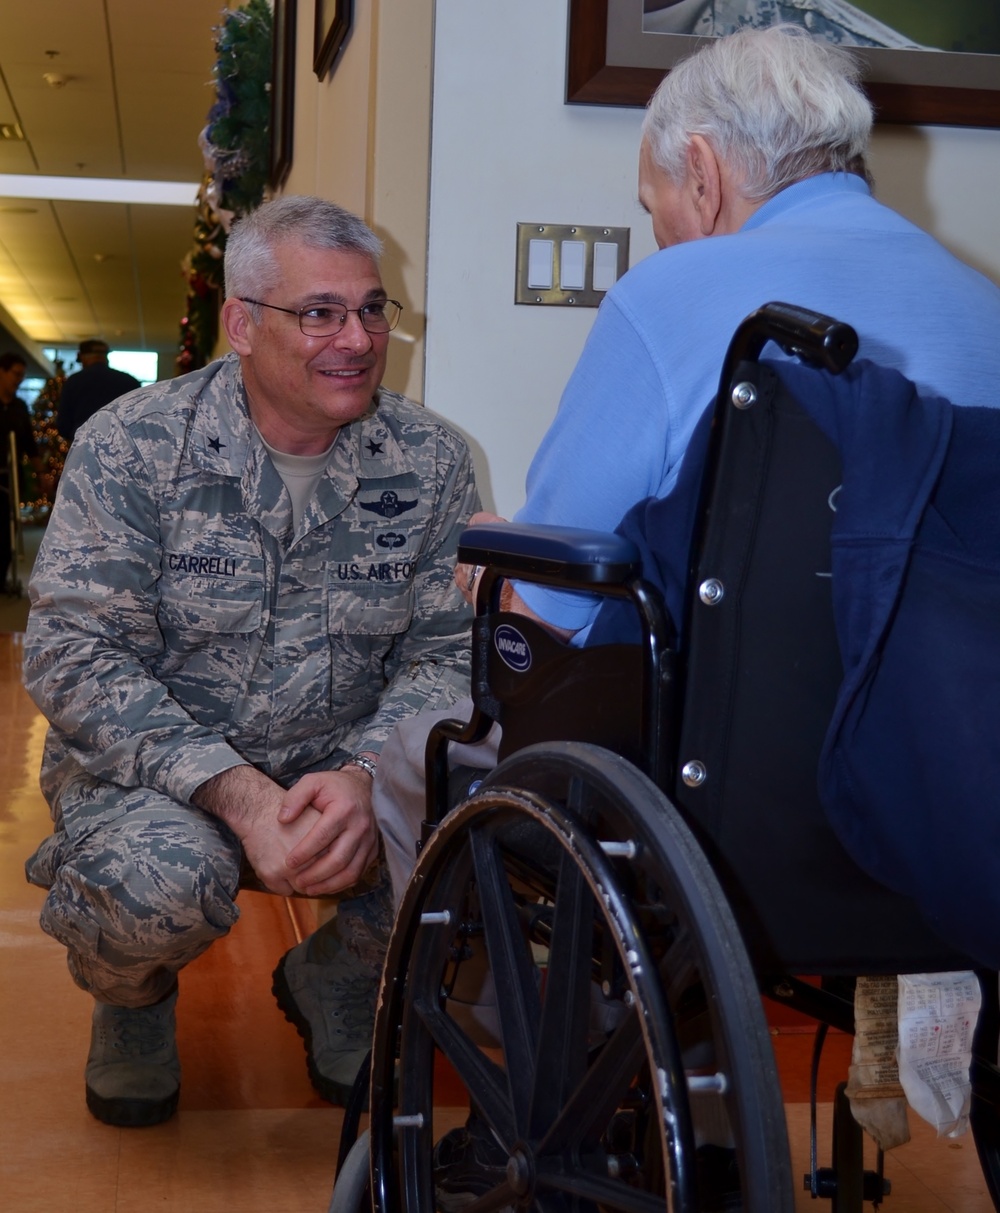 TAG delivers thanks and holiday cheer to Pa. vets